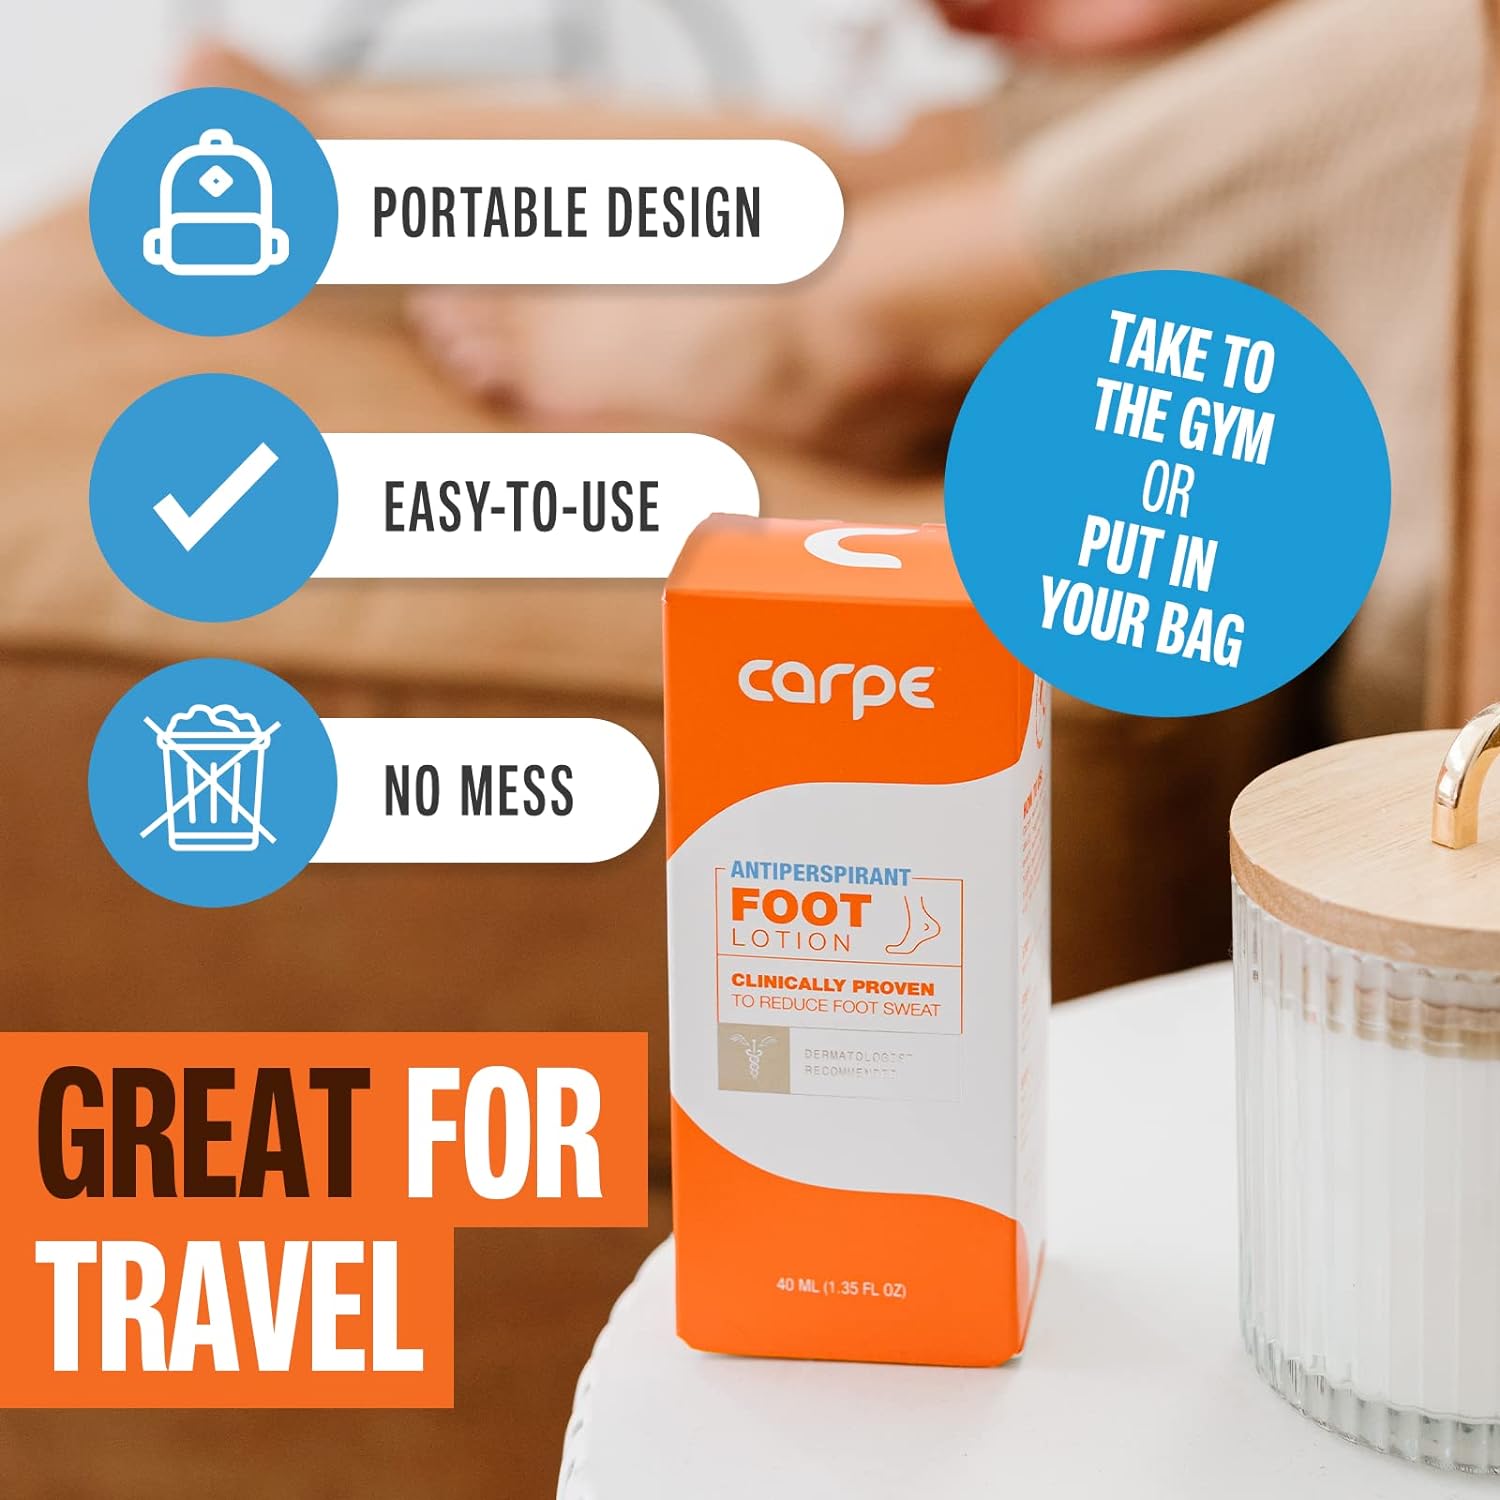 Carpe Antiperspirant Foot Lotion, A dermatologist-recommended solution to stop sweaty, smelly feet, Helps prevent blisters, Great for hyperhidrosis : Beauty & Personal Care